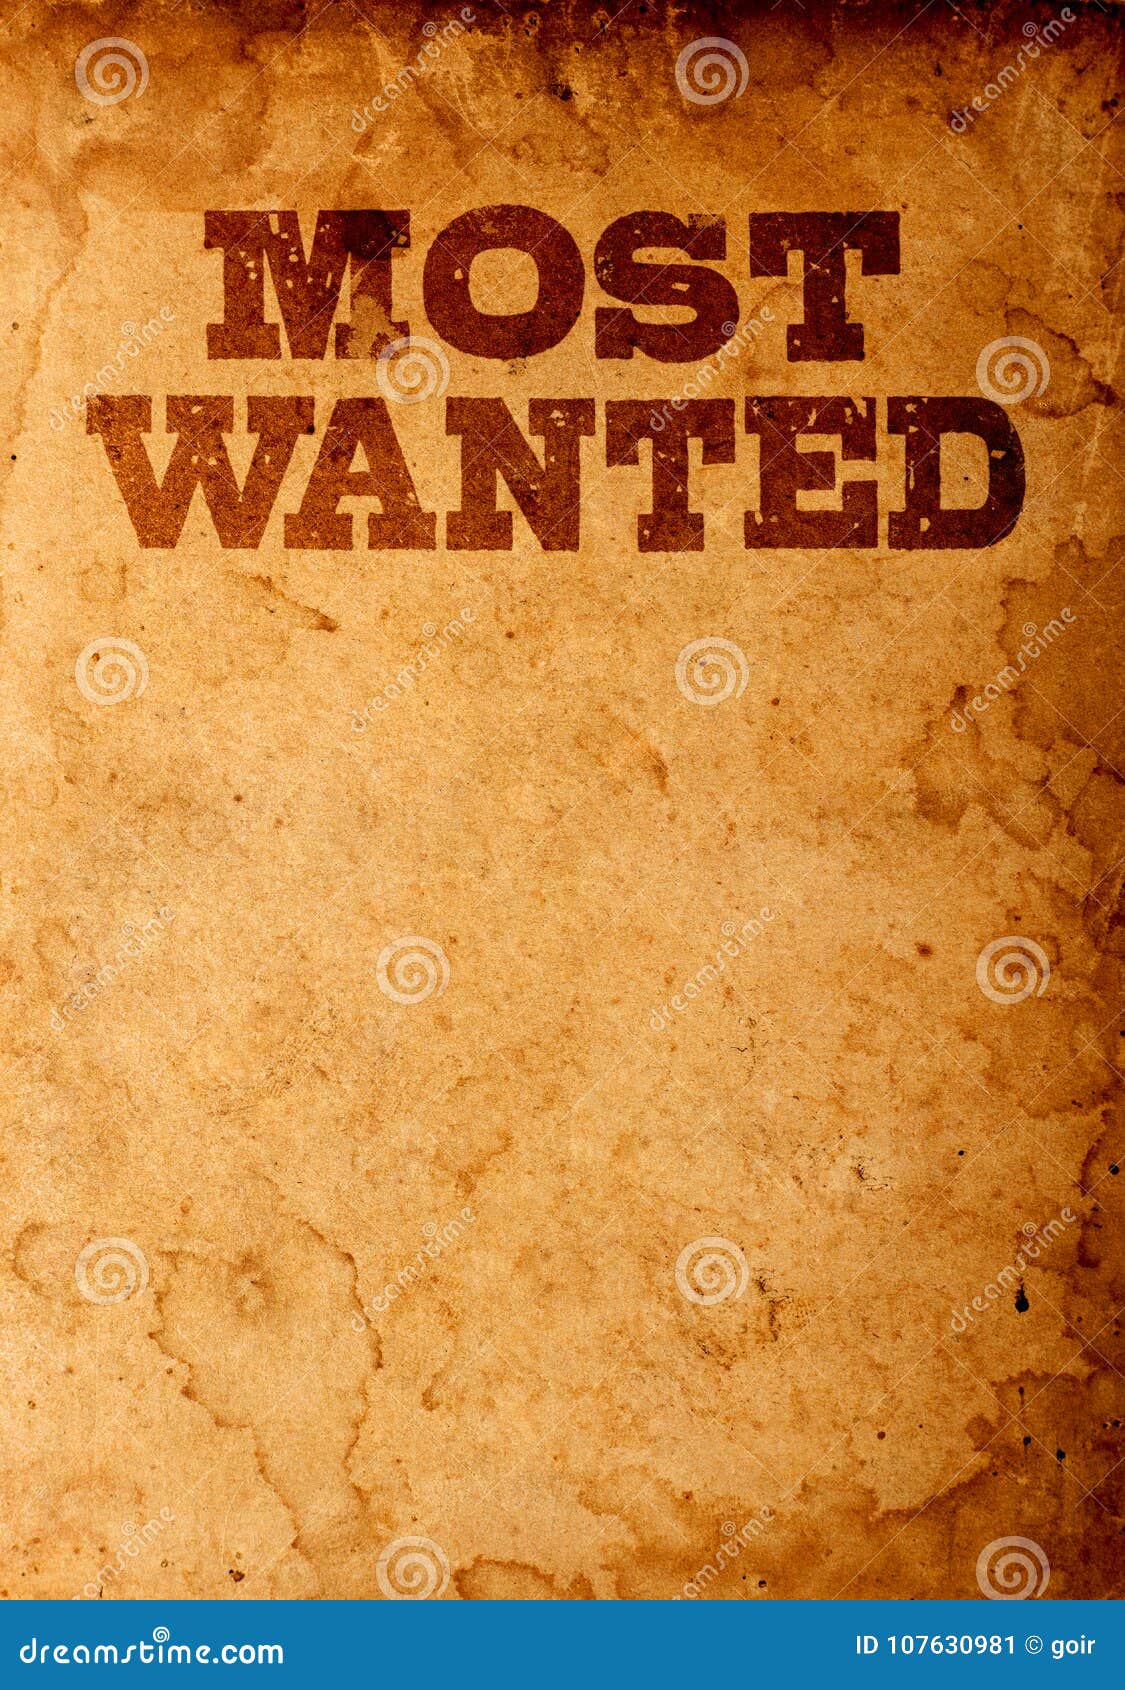 17 565 Wanted Photos Free Royalty Free Stock Photos From Dreamstime